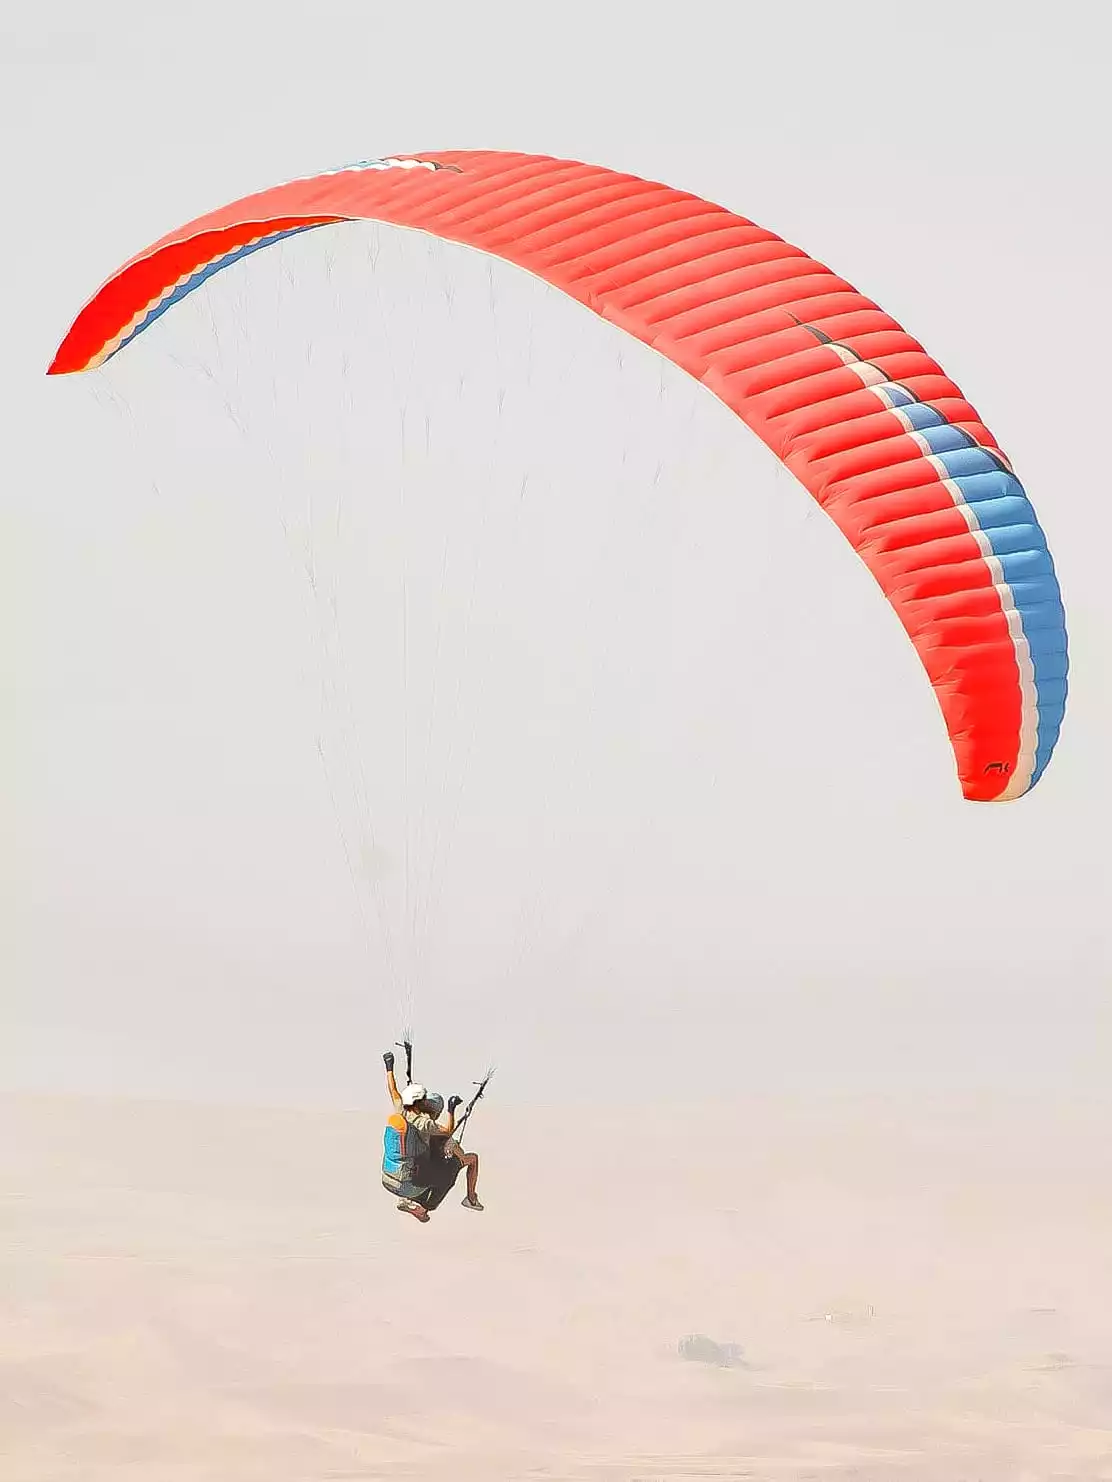 Paragliding-over-the-Kik-plateau-from-Marrakech-nomad-excursion-outdoor-activity